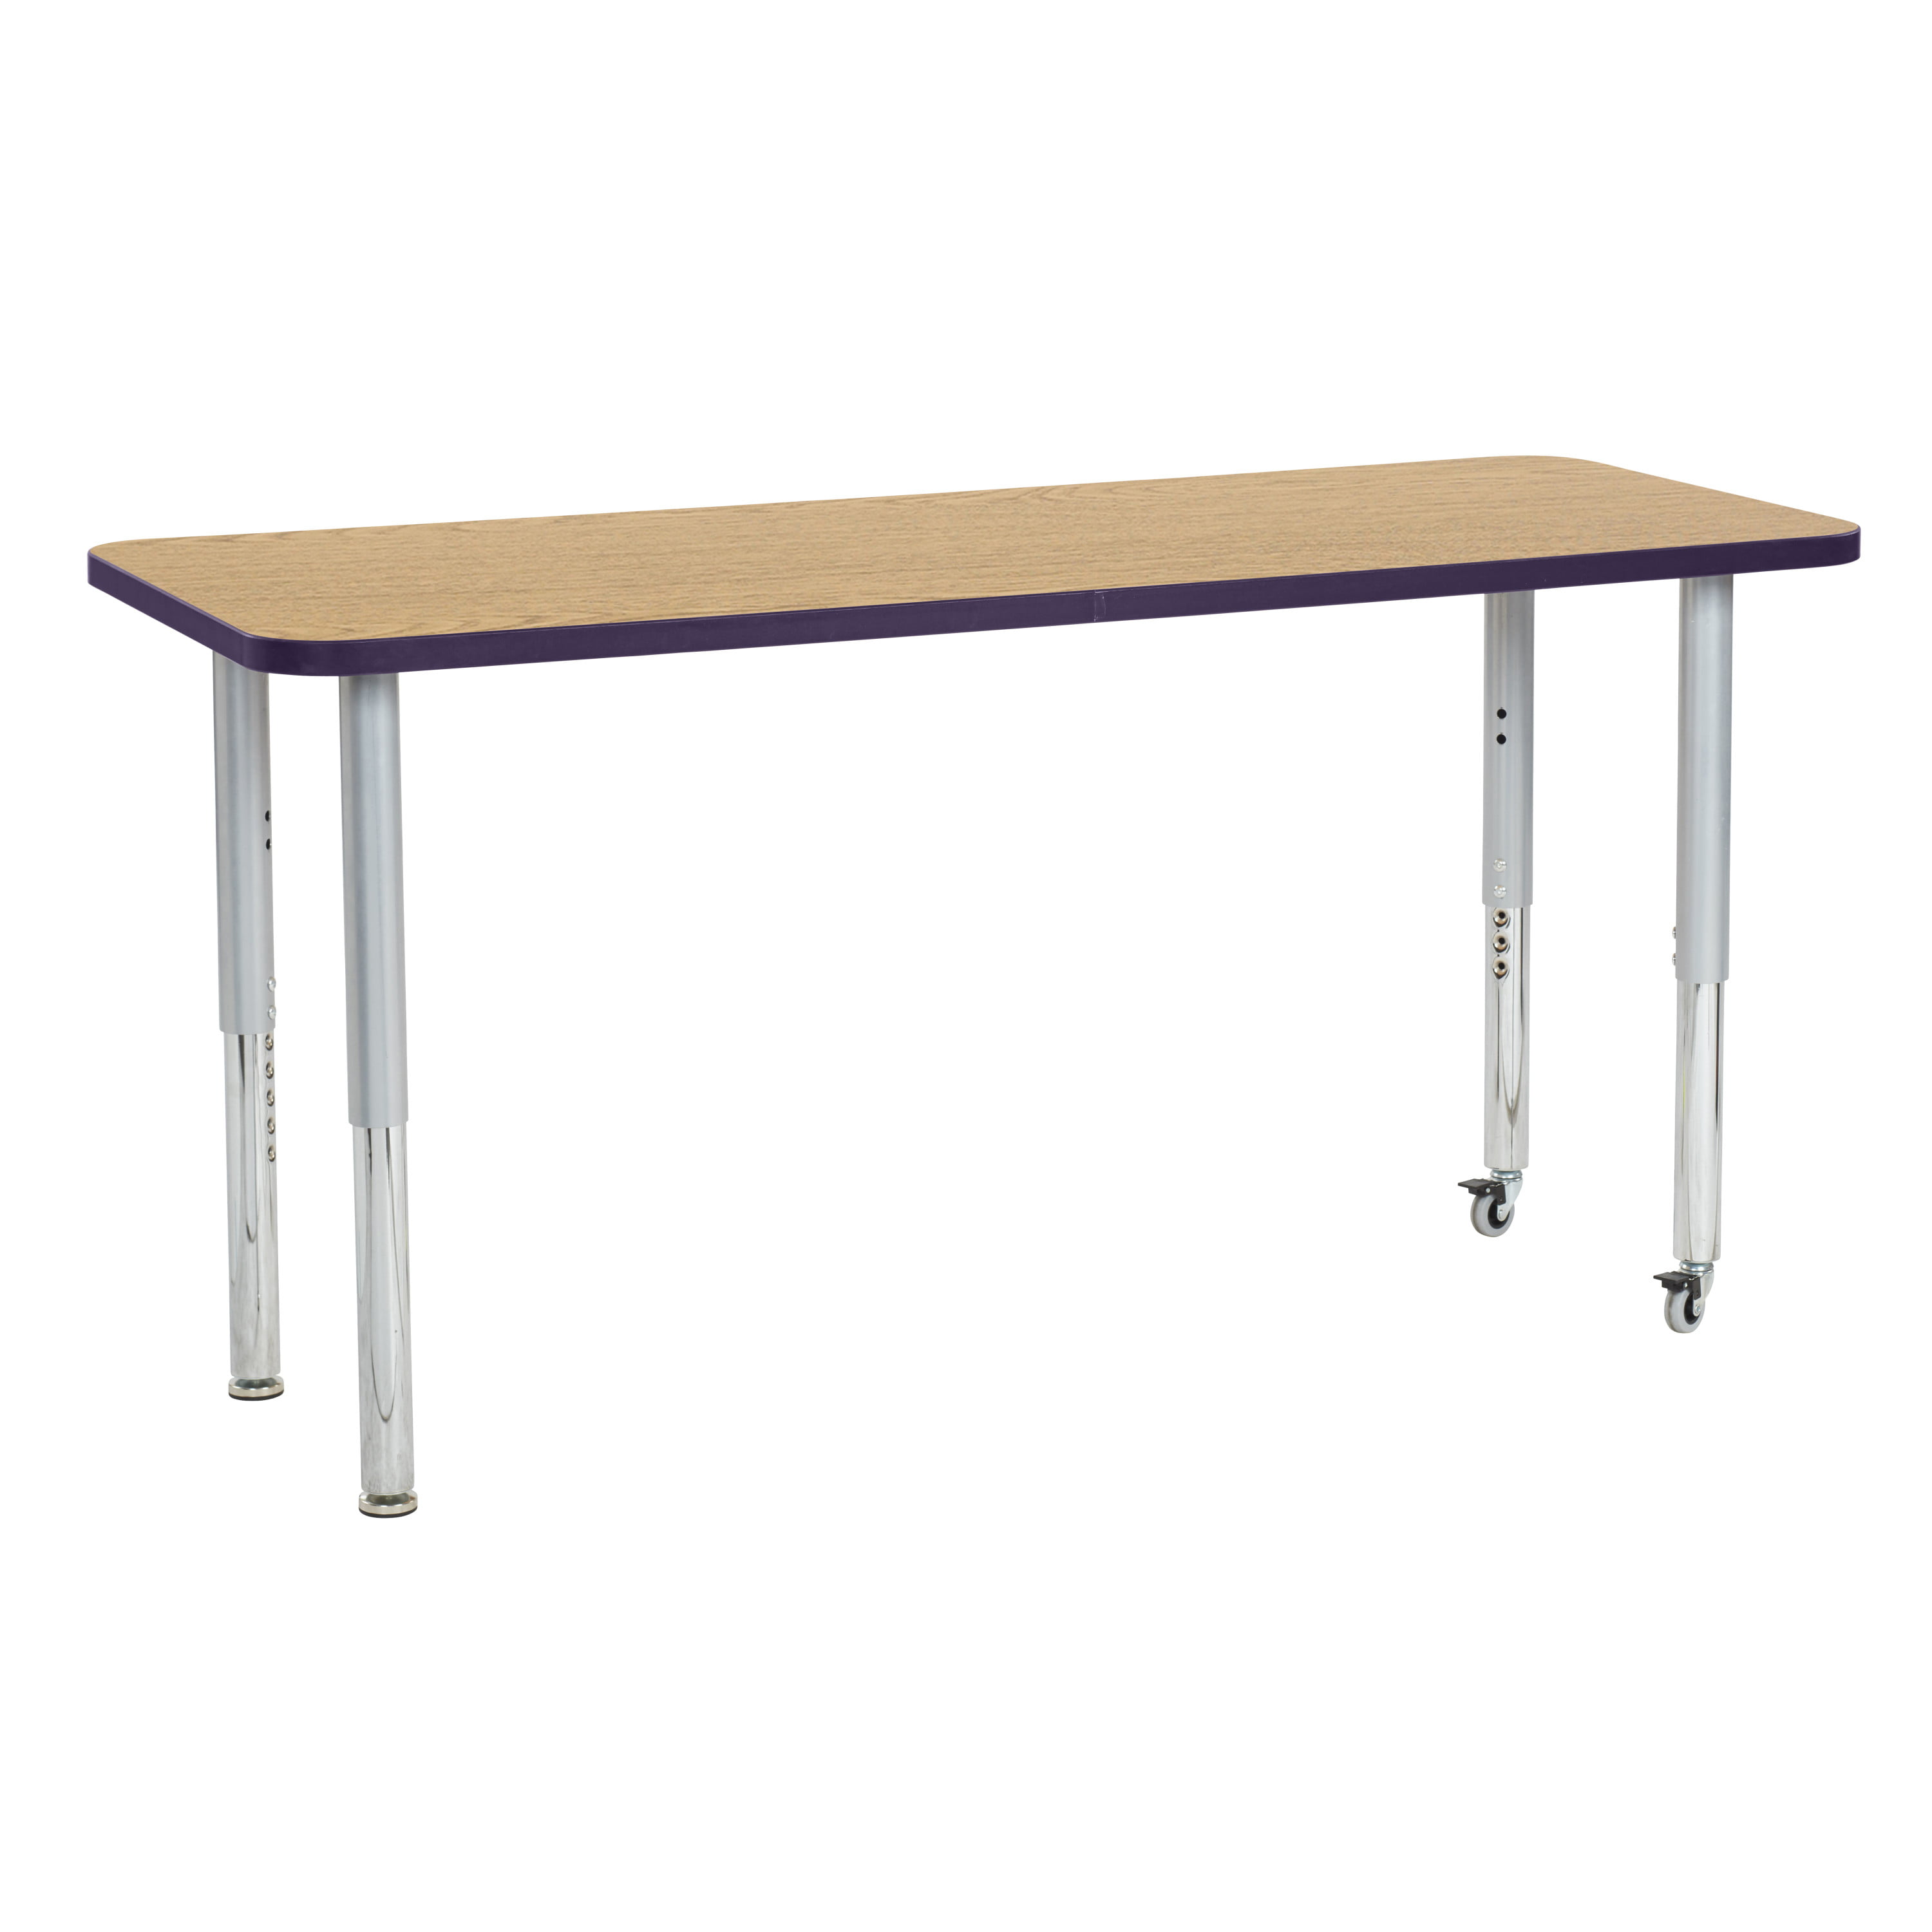 Adults Colours Kids Details about   Wooden Table Adjustable Metal Legs for Children School 